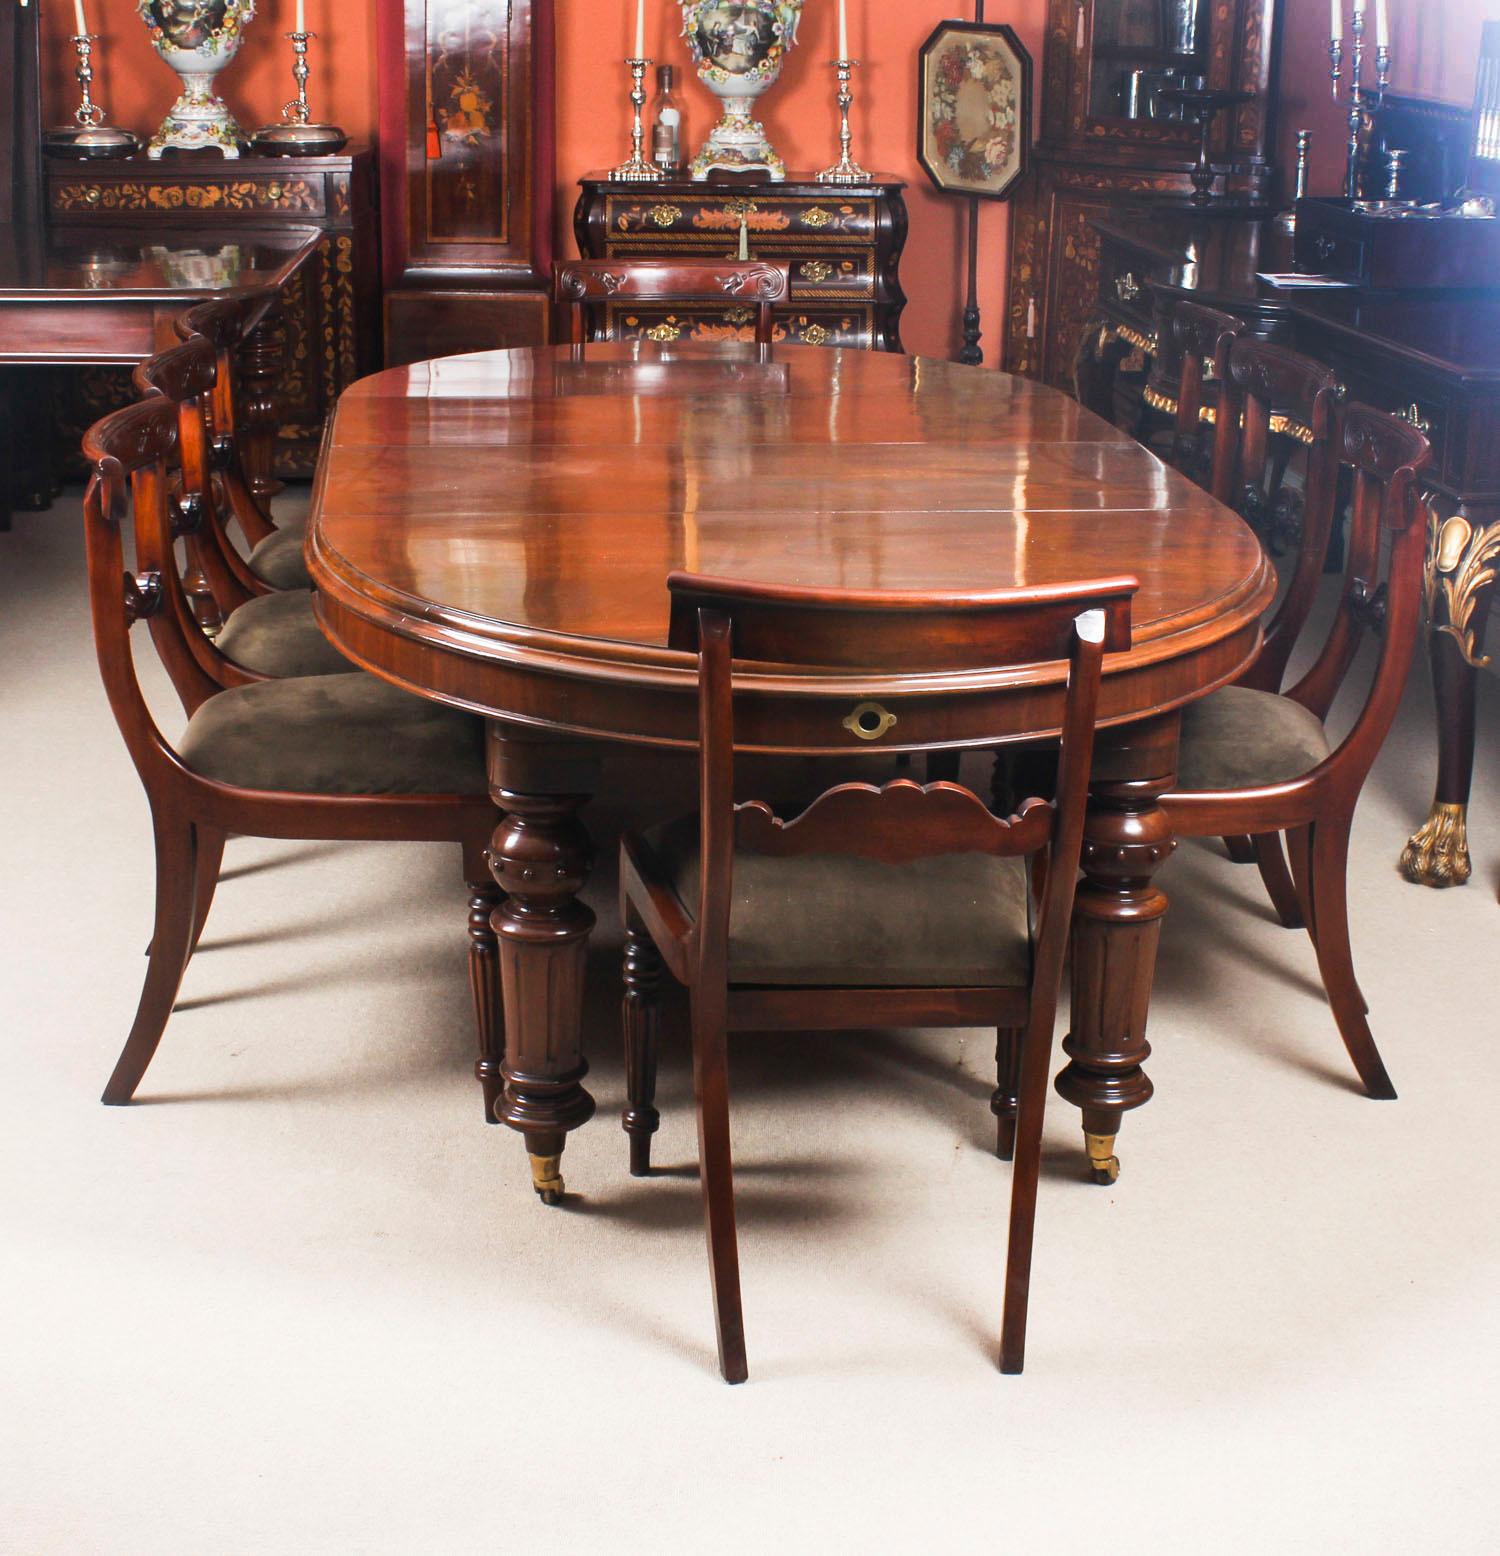 This is a fabulous dining set comprising an antique Victorian mahogany oval extending dining table, circa 1860 in date with a set of eight bespoke Regency style mahogany bar back dining chairs.

The table has two original leaves and has been